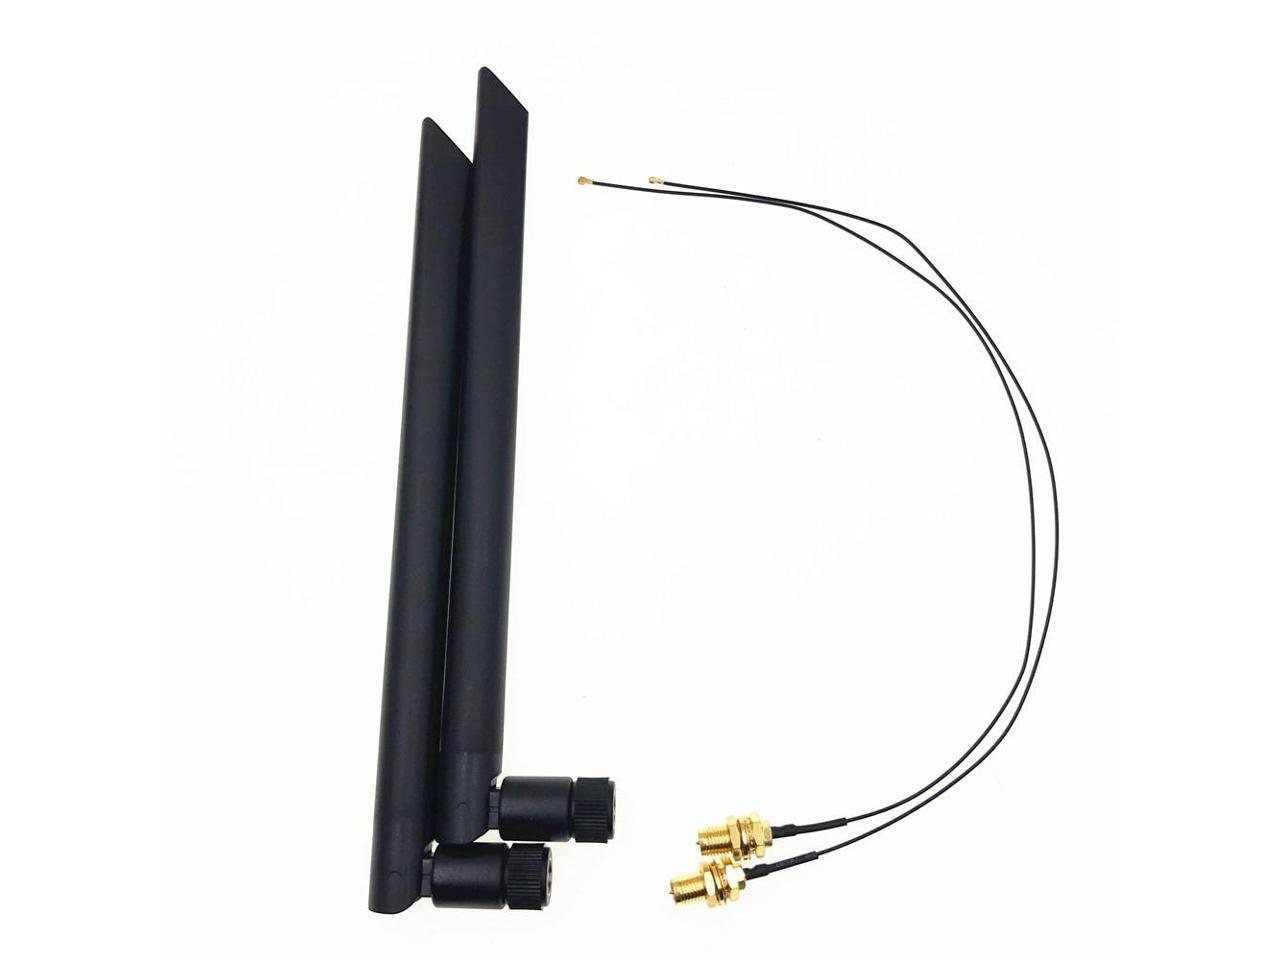 4/5G wifi antennas for Intel 7260 7265 NGFF card 18.5cm A pair of IPEX MHF4 2 